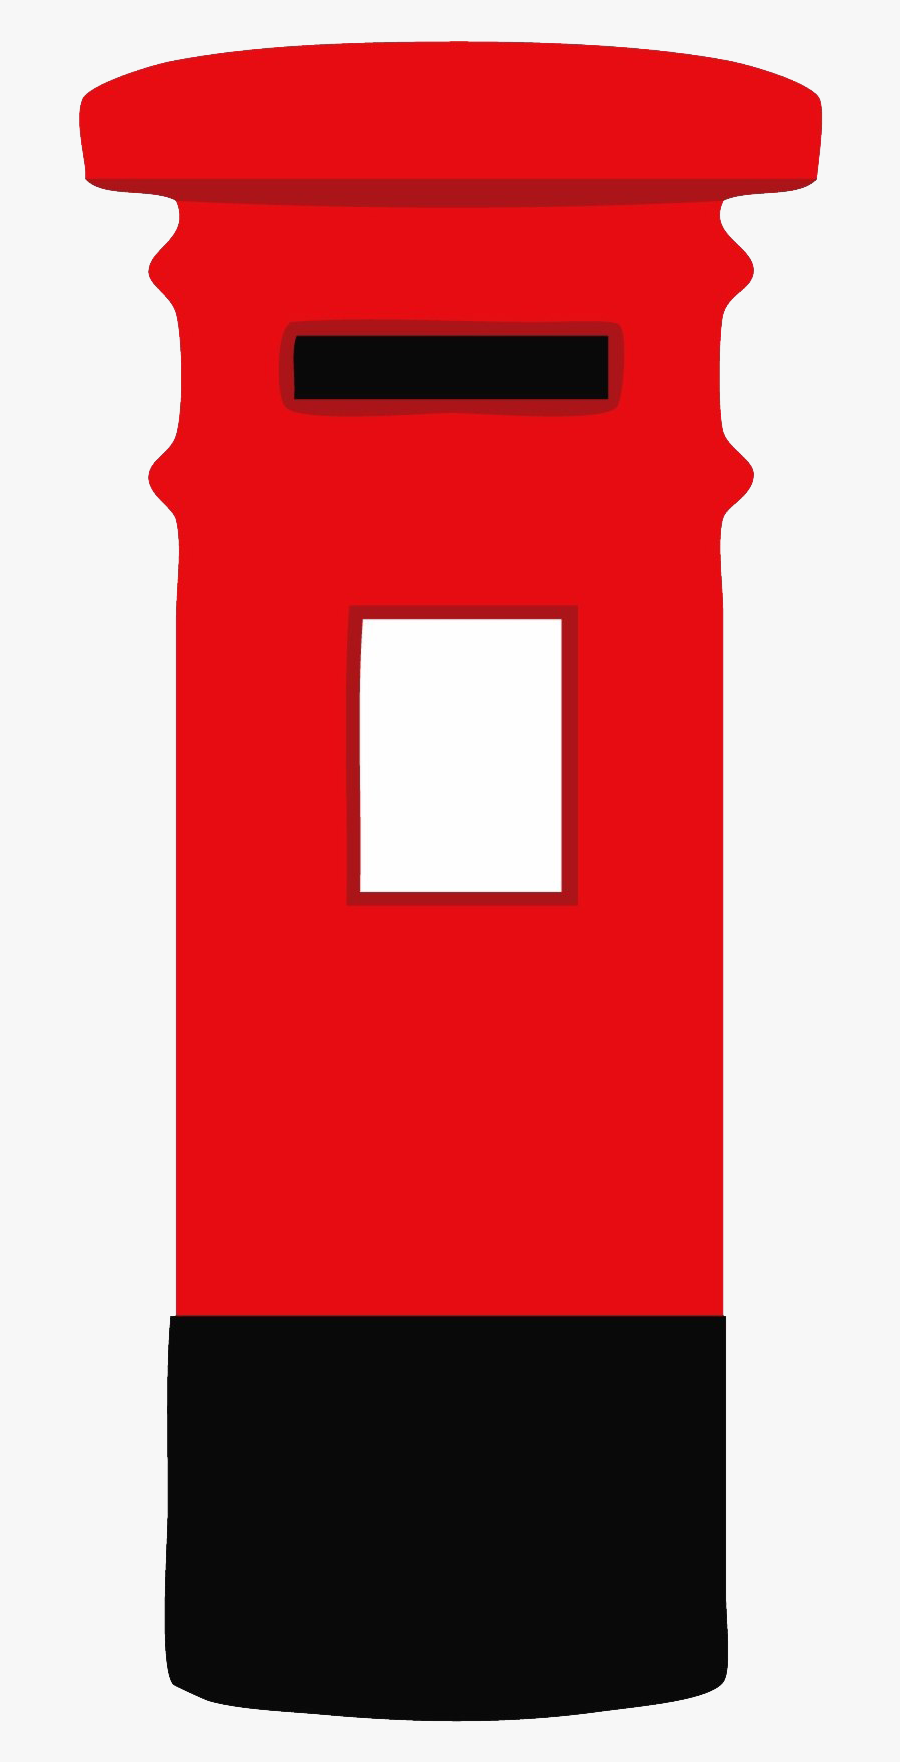 Postbox Png - Red Post Box Clipart, Transparent Clipart